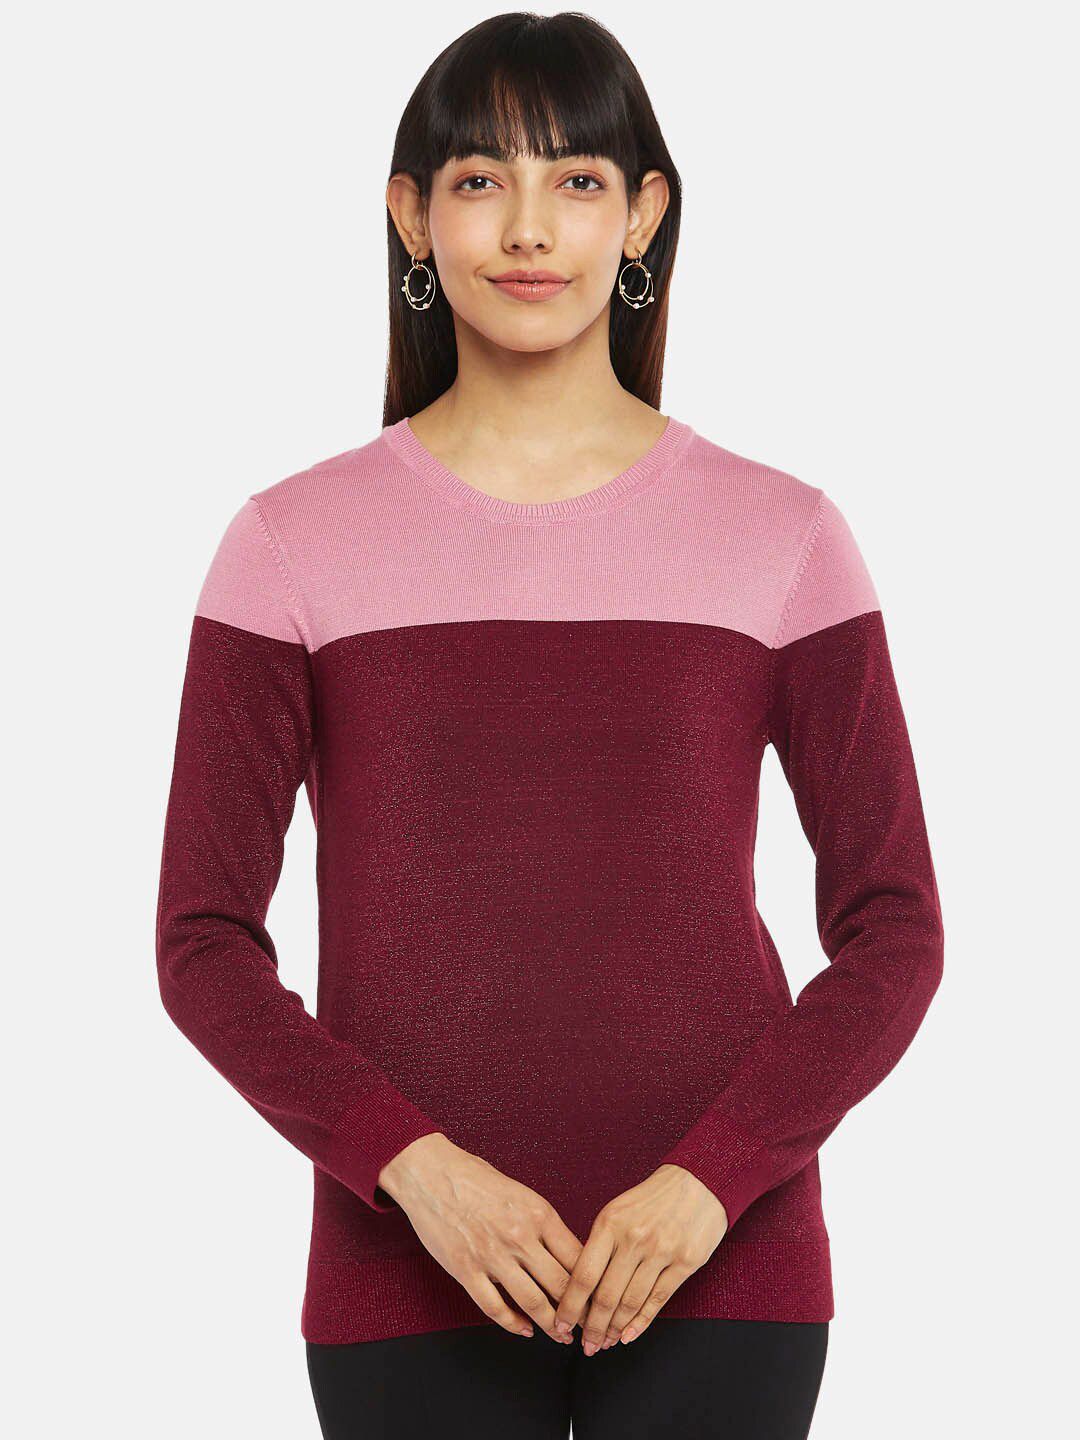 Annabelle by Pantaloons Red Colourblocked Top Price in India